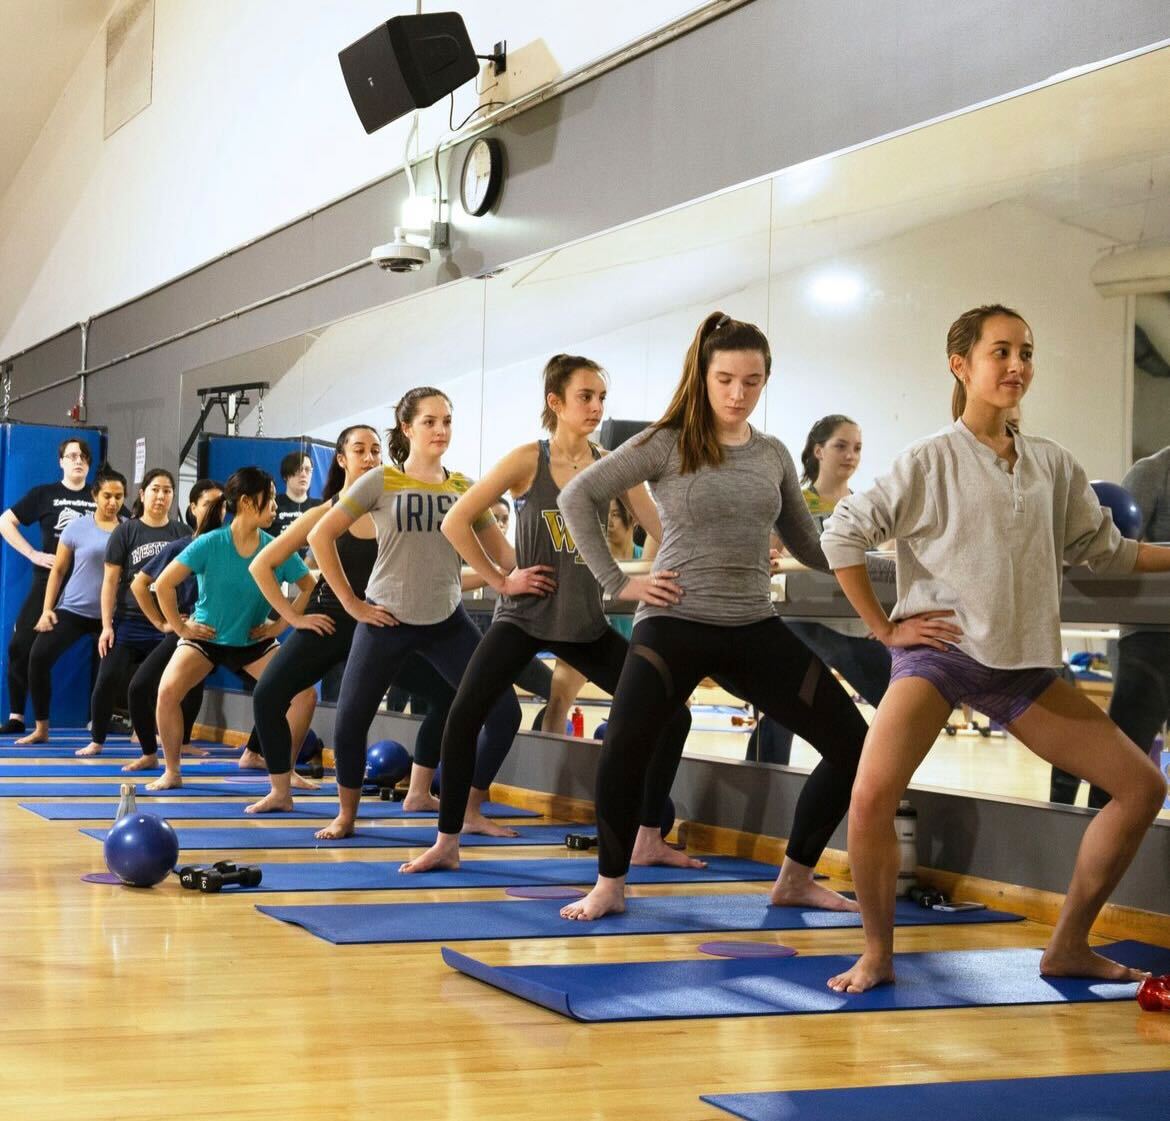 Georgetown students can take LRED courses, zero-credit classes that give them the chance to take instructed physical education courses with the goal of promoting a healthy lifestyle. | GU Campus Recreation